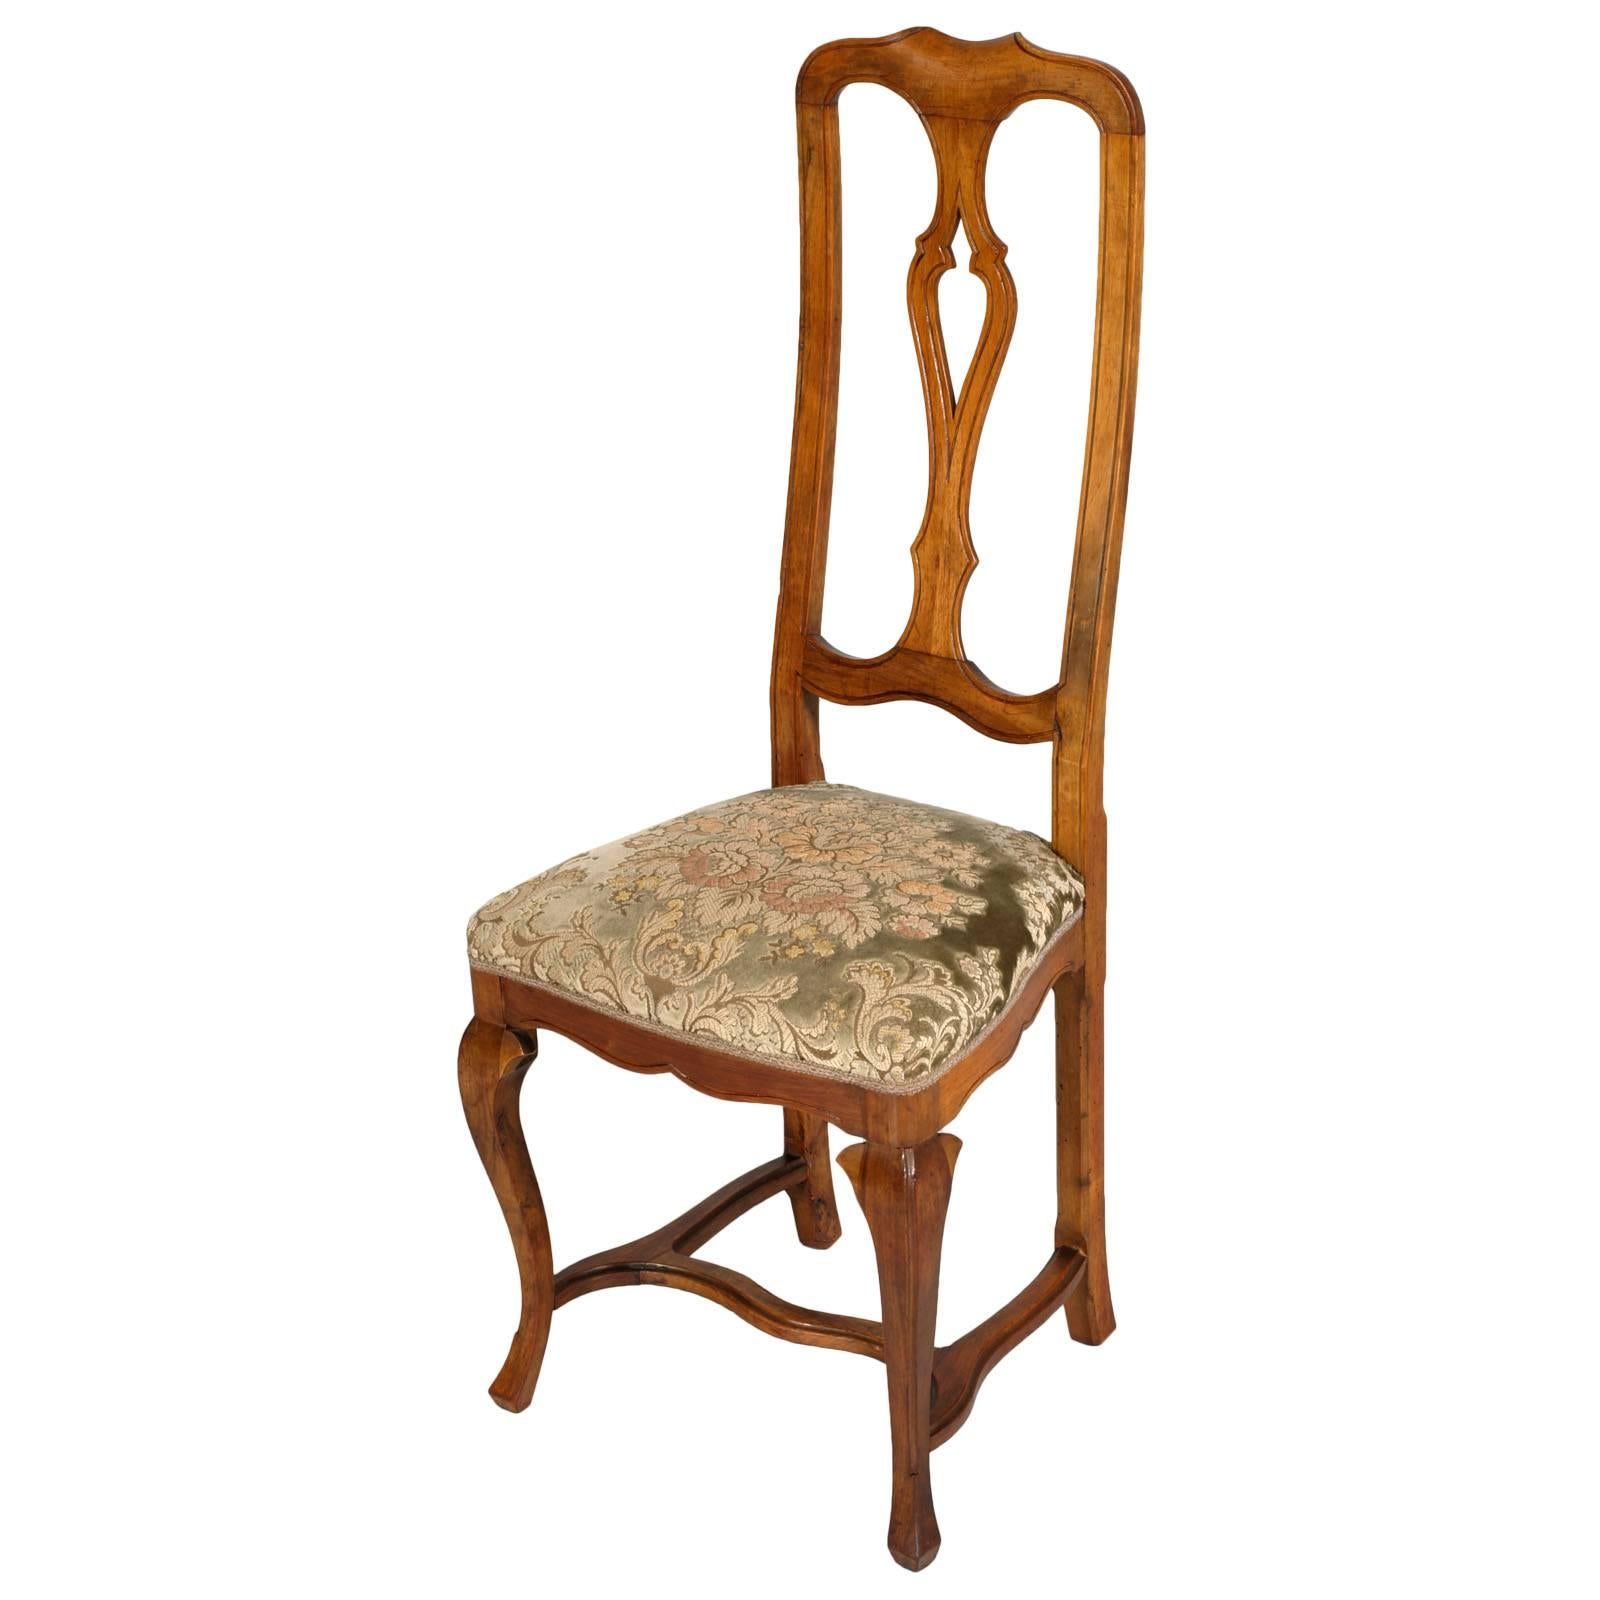 A 19th century important Venetian set of eight elegant tall Baroque dining chairs in solid blond walnut, richly carved front and back. Cabriole legs joined by serpentine stretchers,
Seat covering in damask fabric from the 1970s still in very good